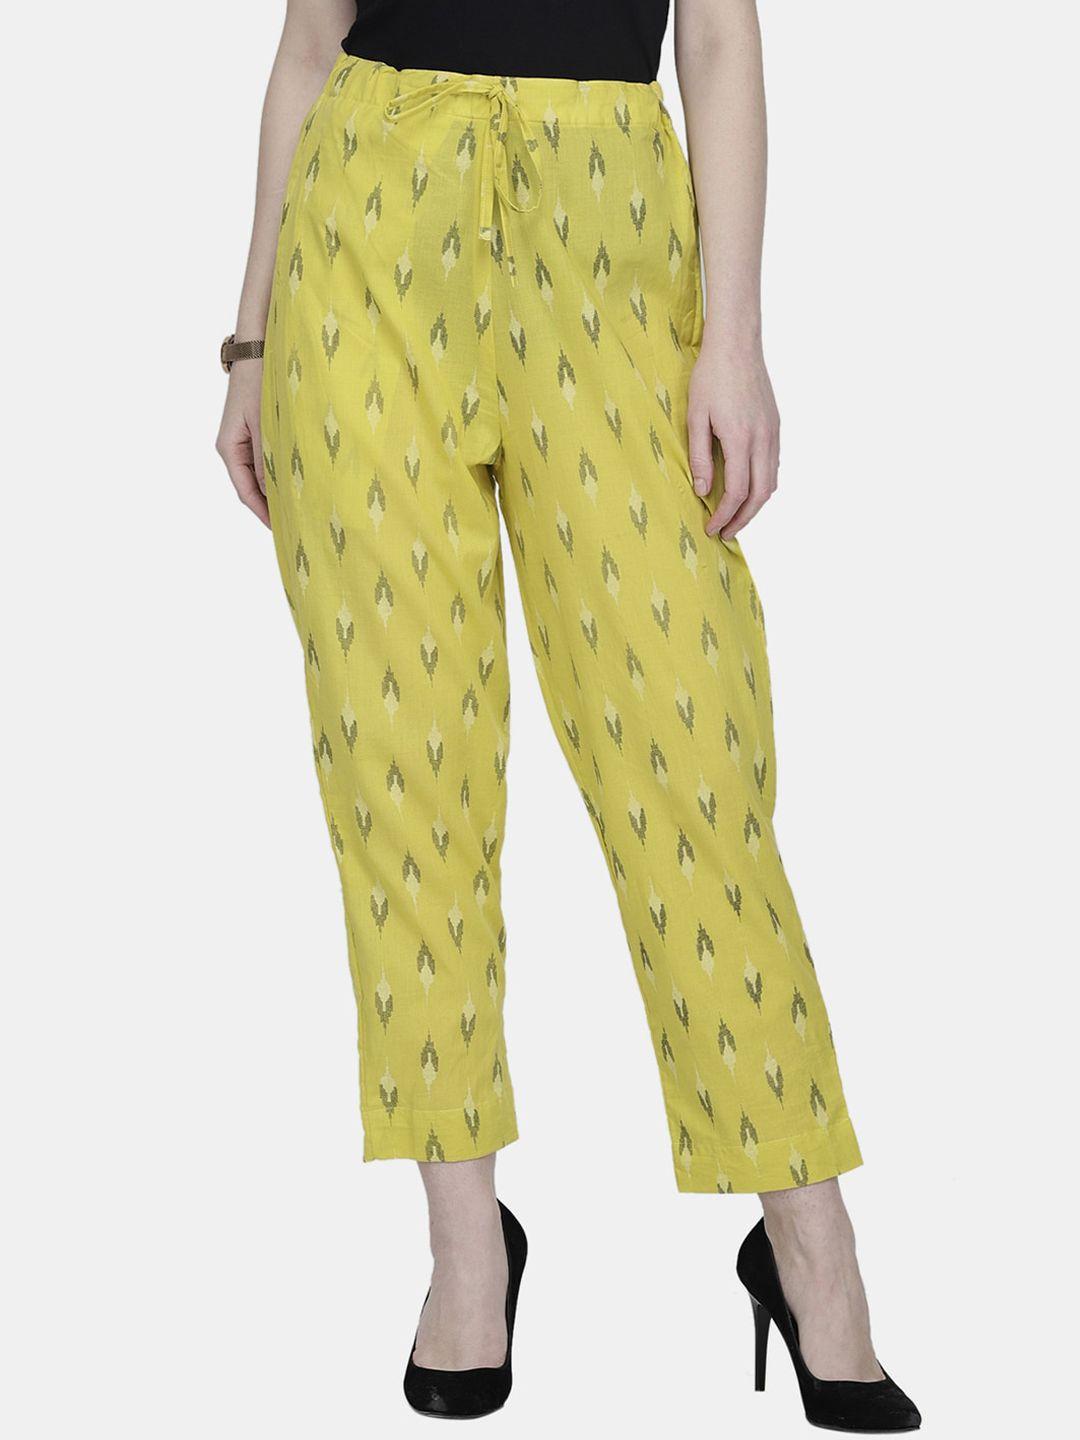 enchanted-drapes-women-yellow-printed-trousers